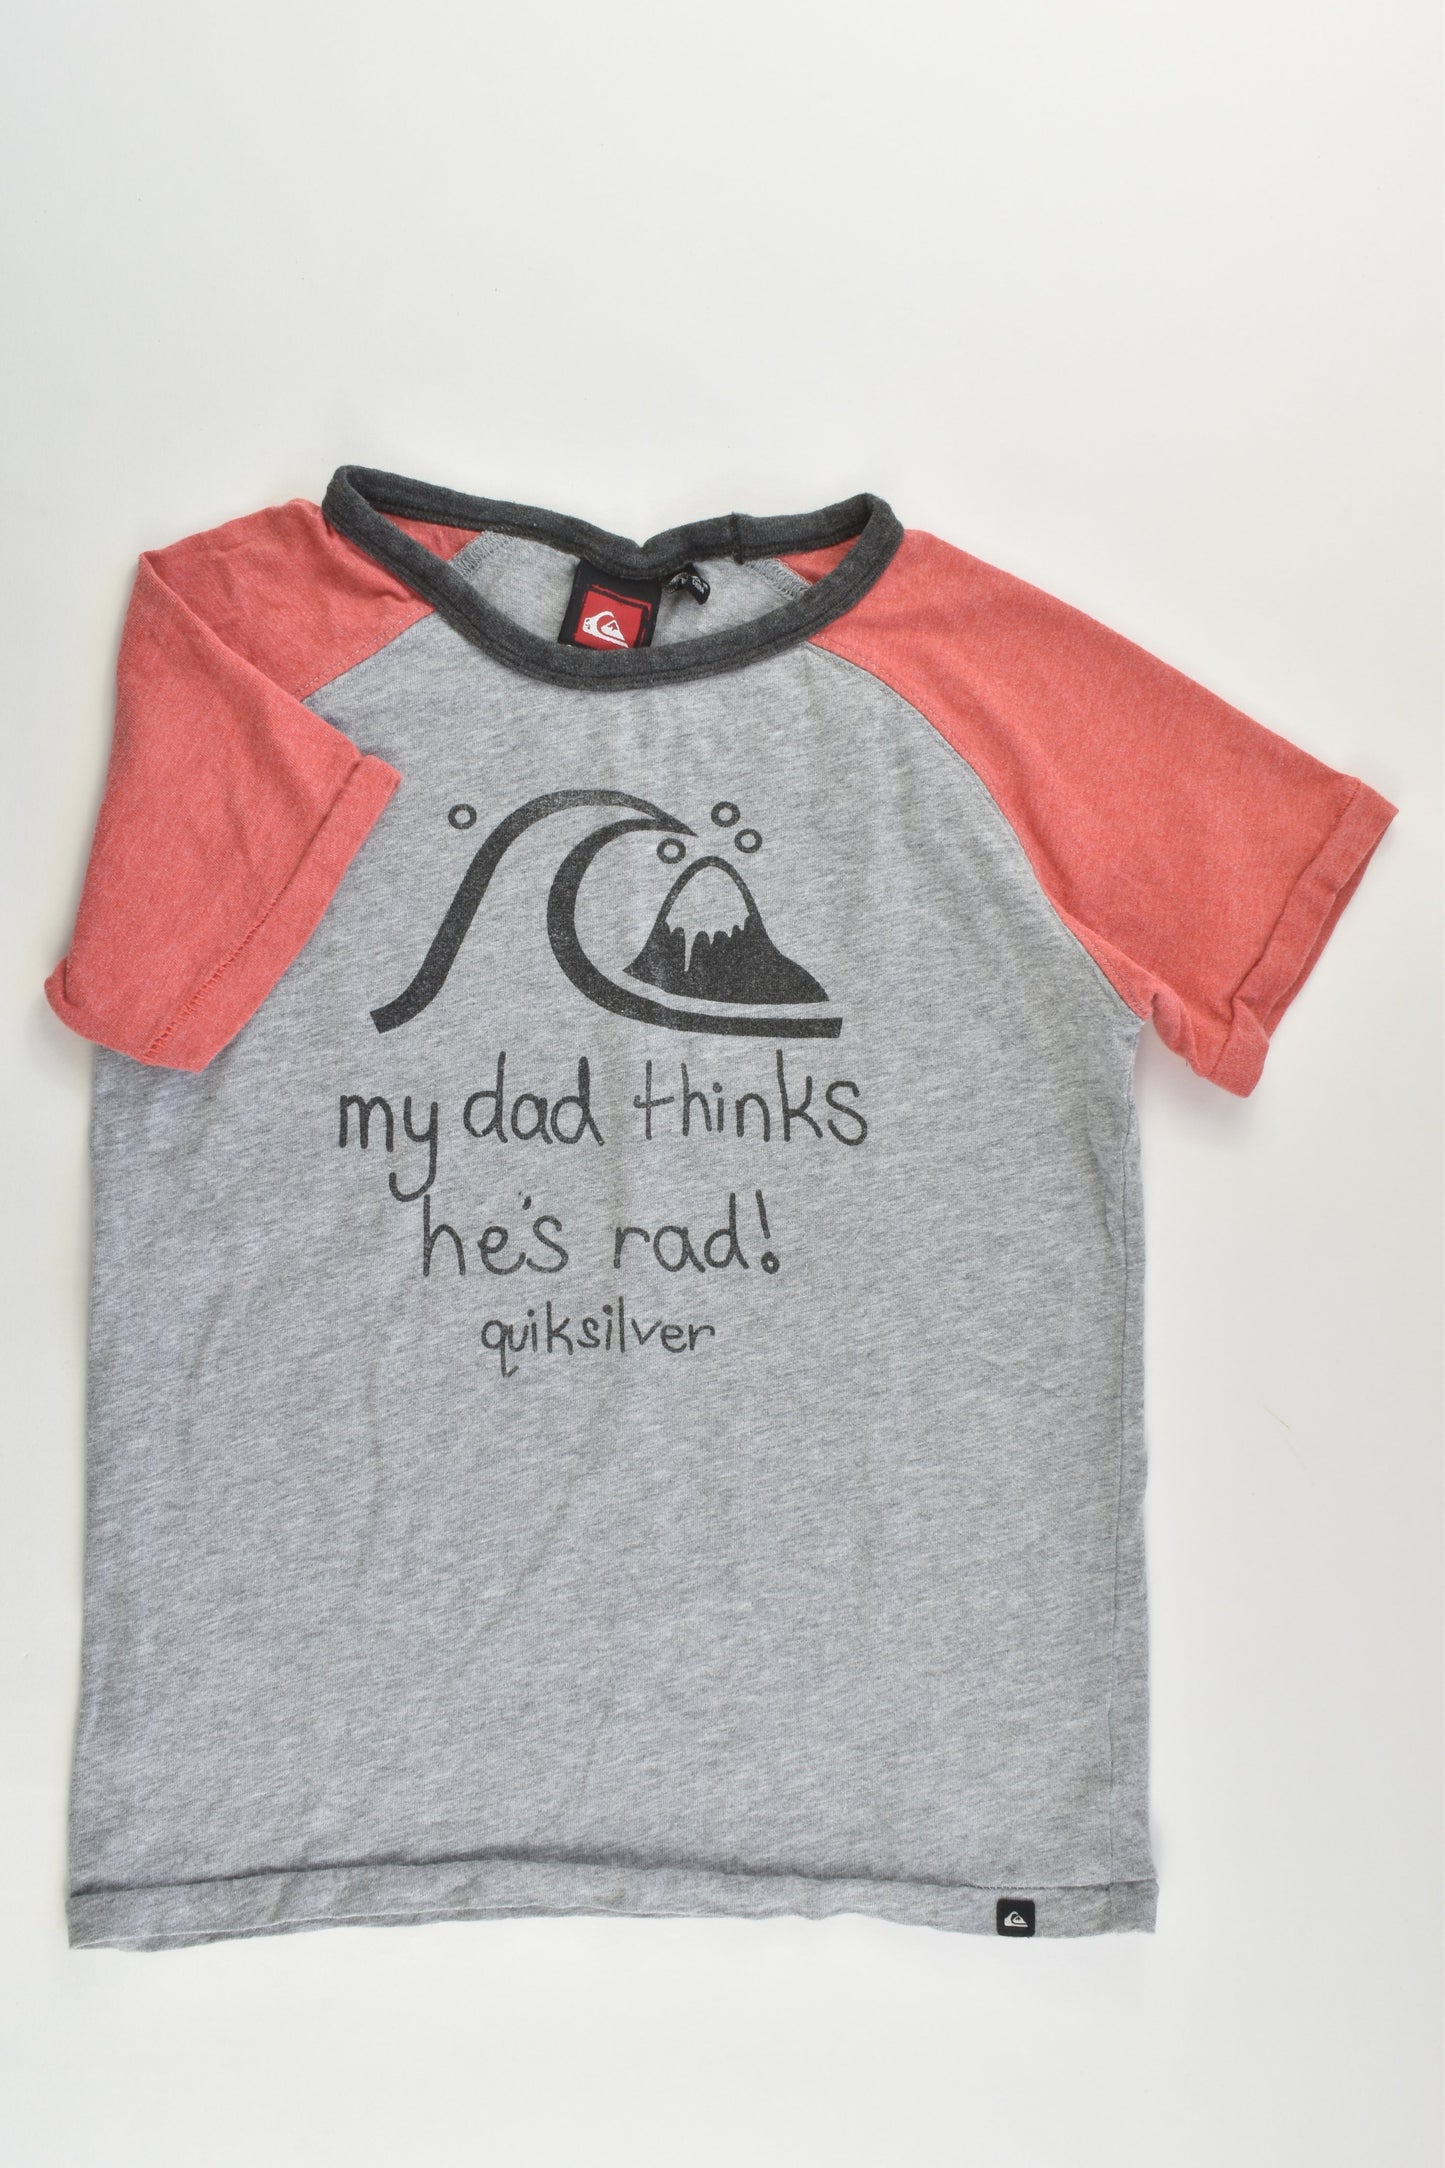 Quiksilver Size 6 'My Dad Thinks He's Rad' T-shirt